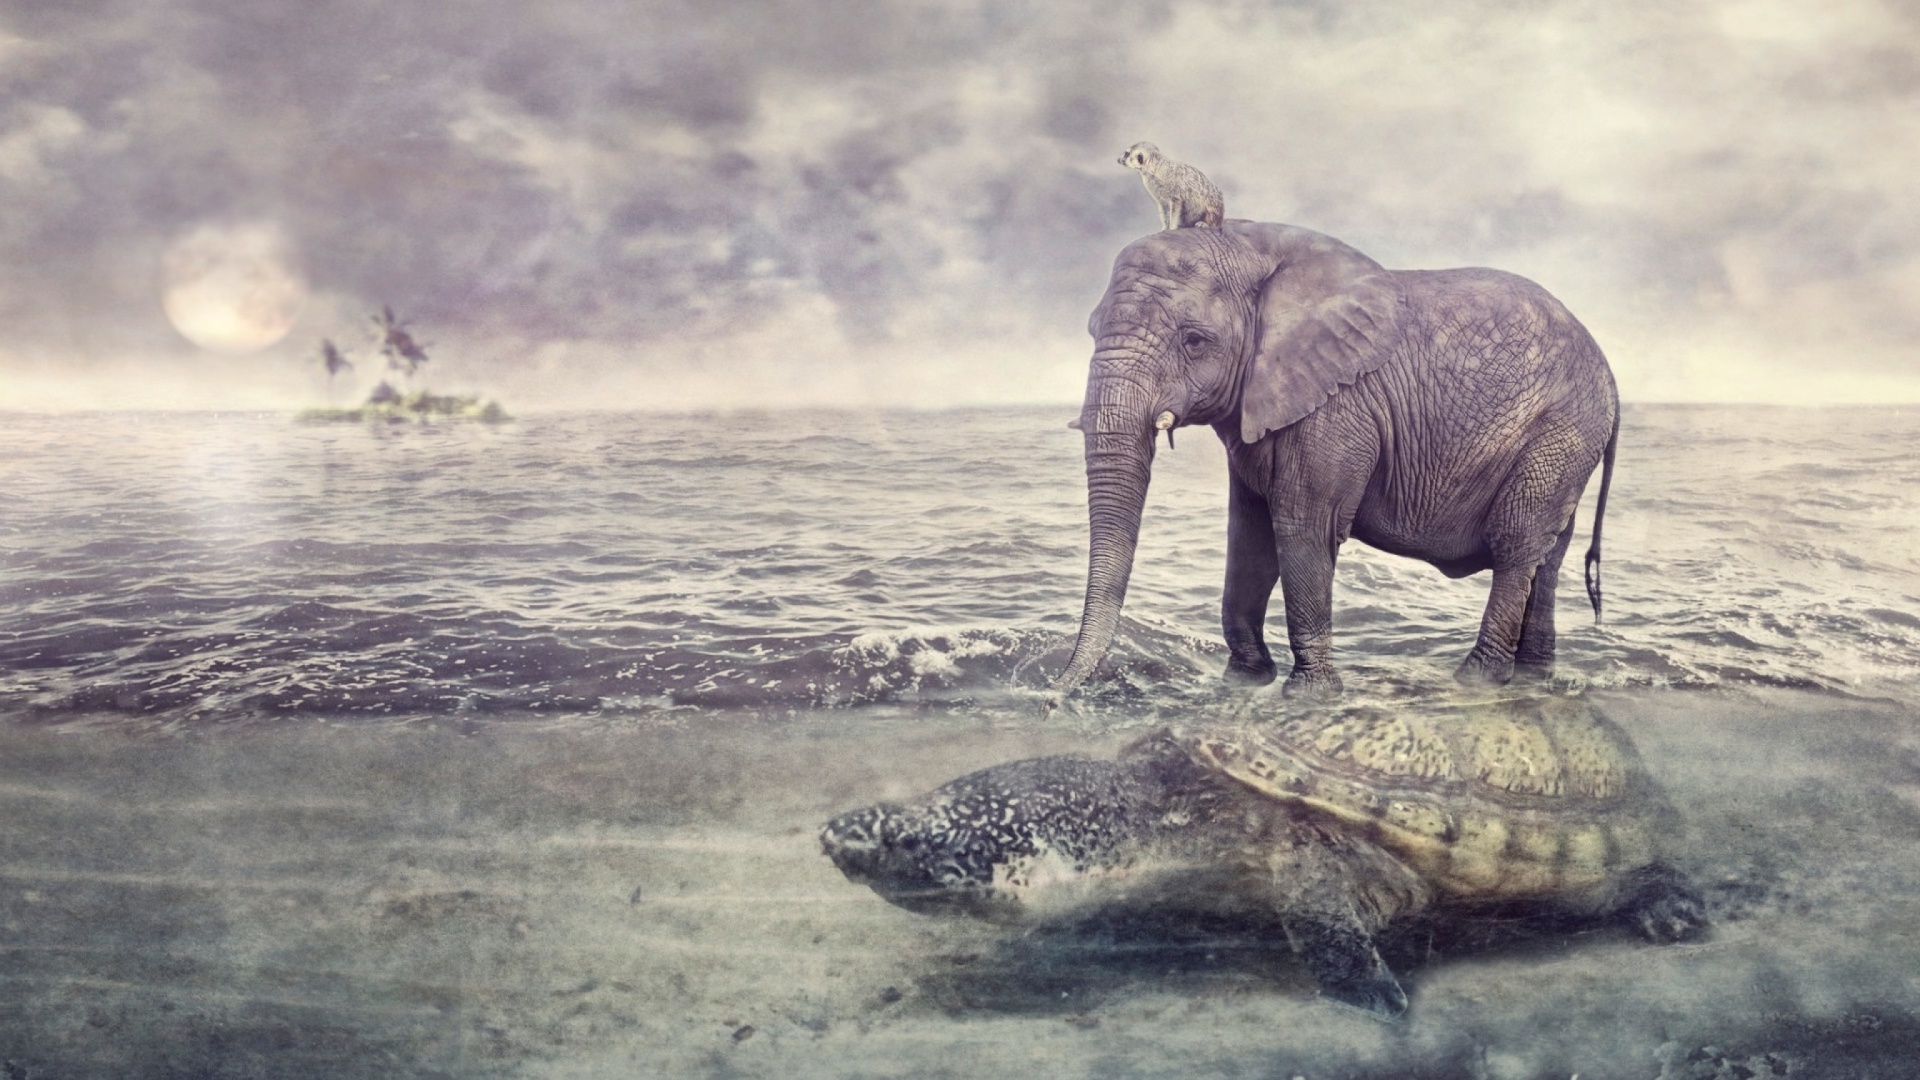 Elephant and Turtle wallpaper 1920x1080